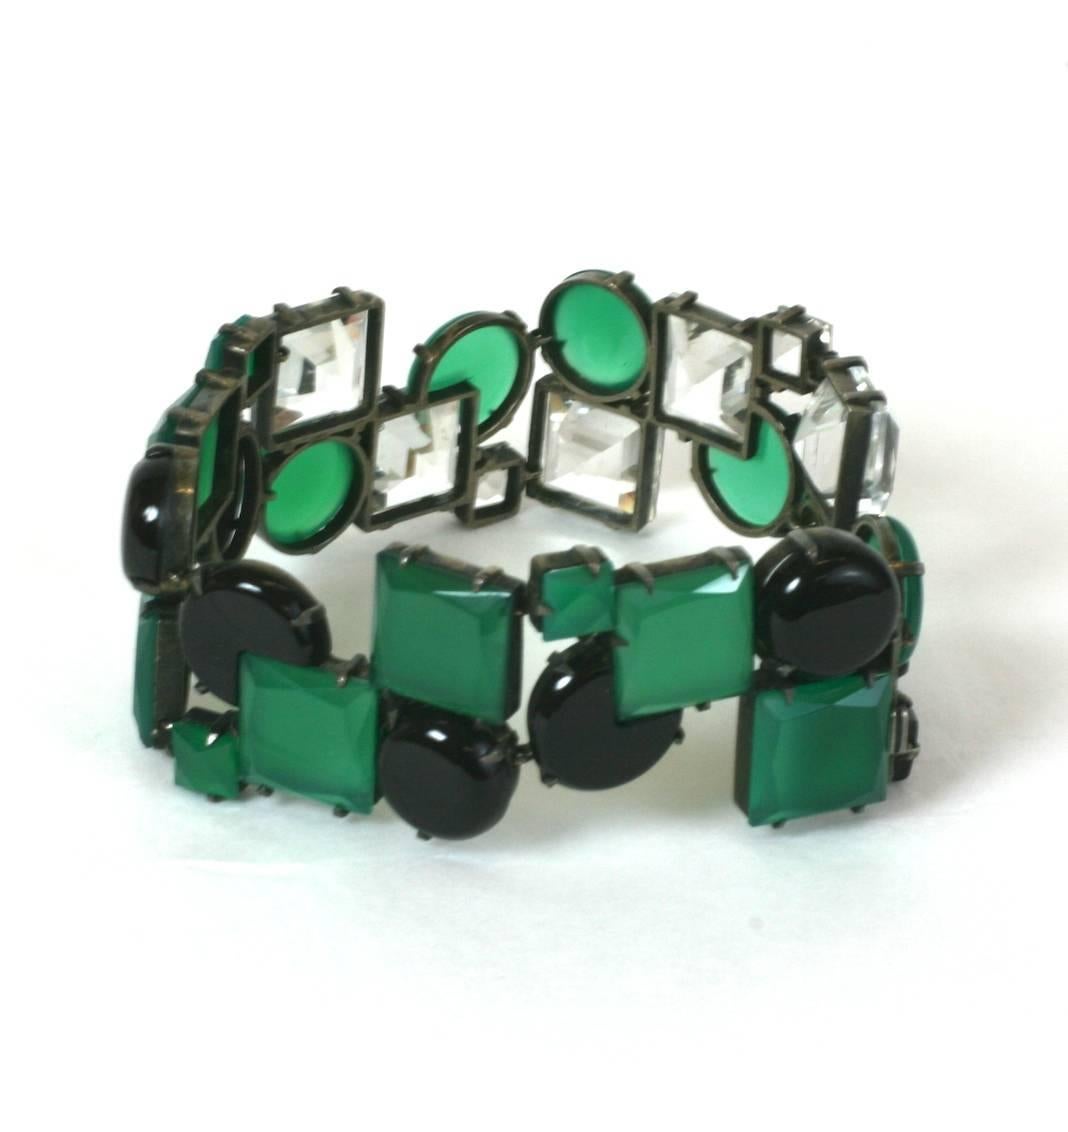 Important Art Deco Cubist Bracelet In Excellent Condition For Sale In New York, NY